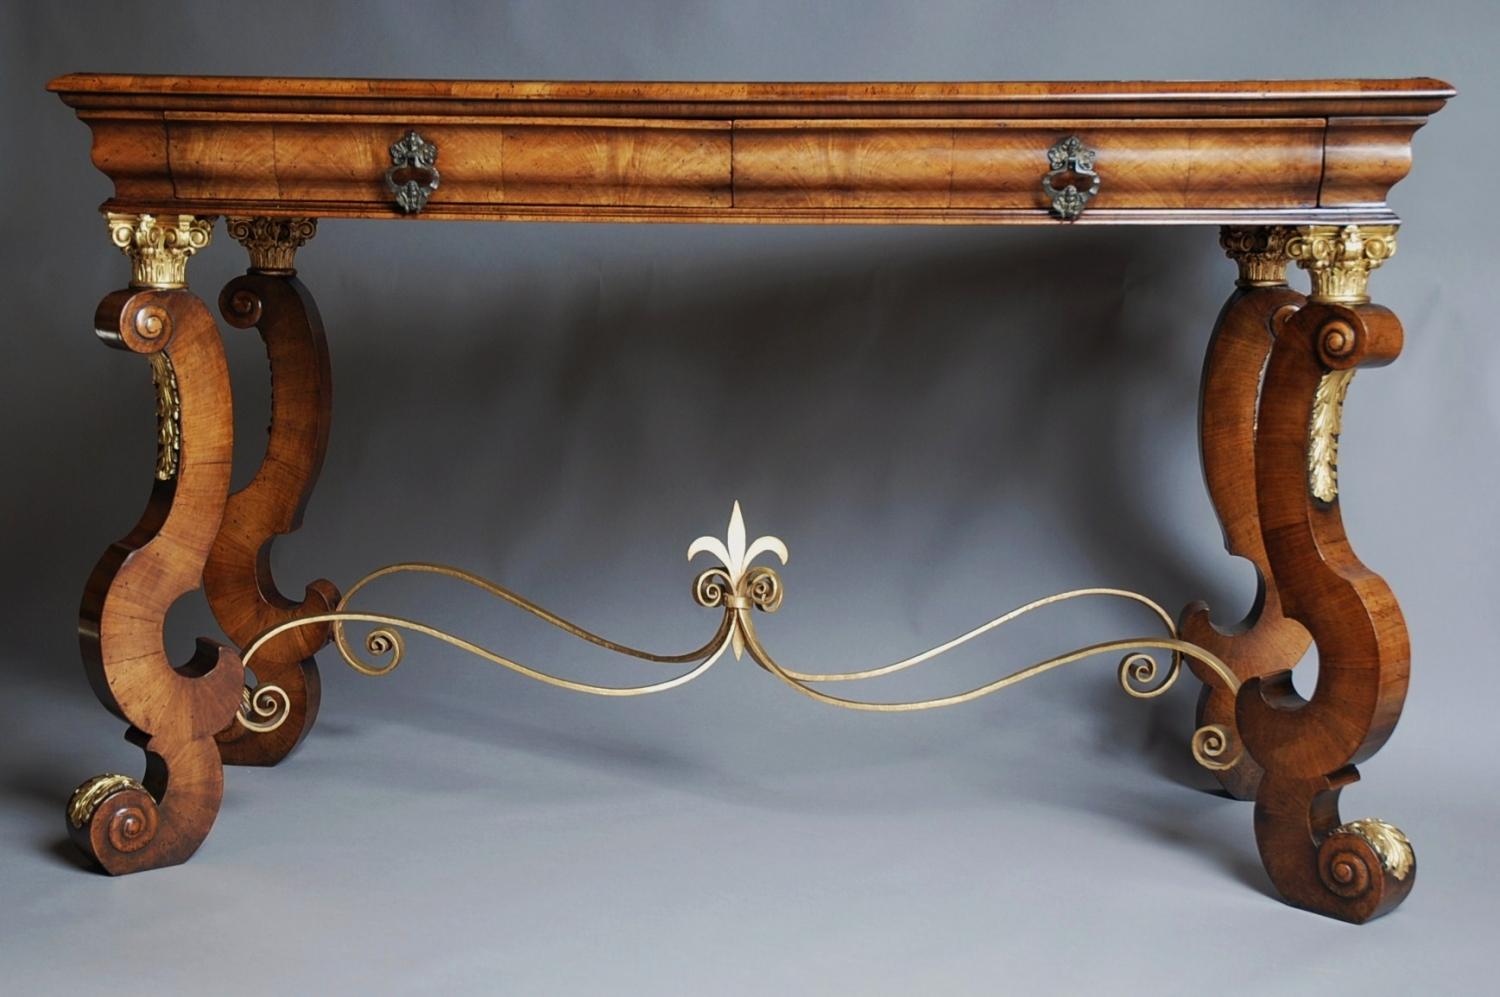 Highly decorative walnut console table